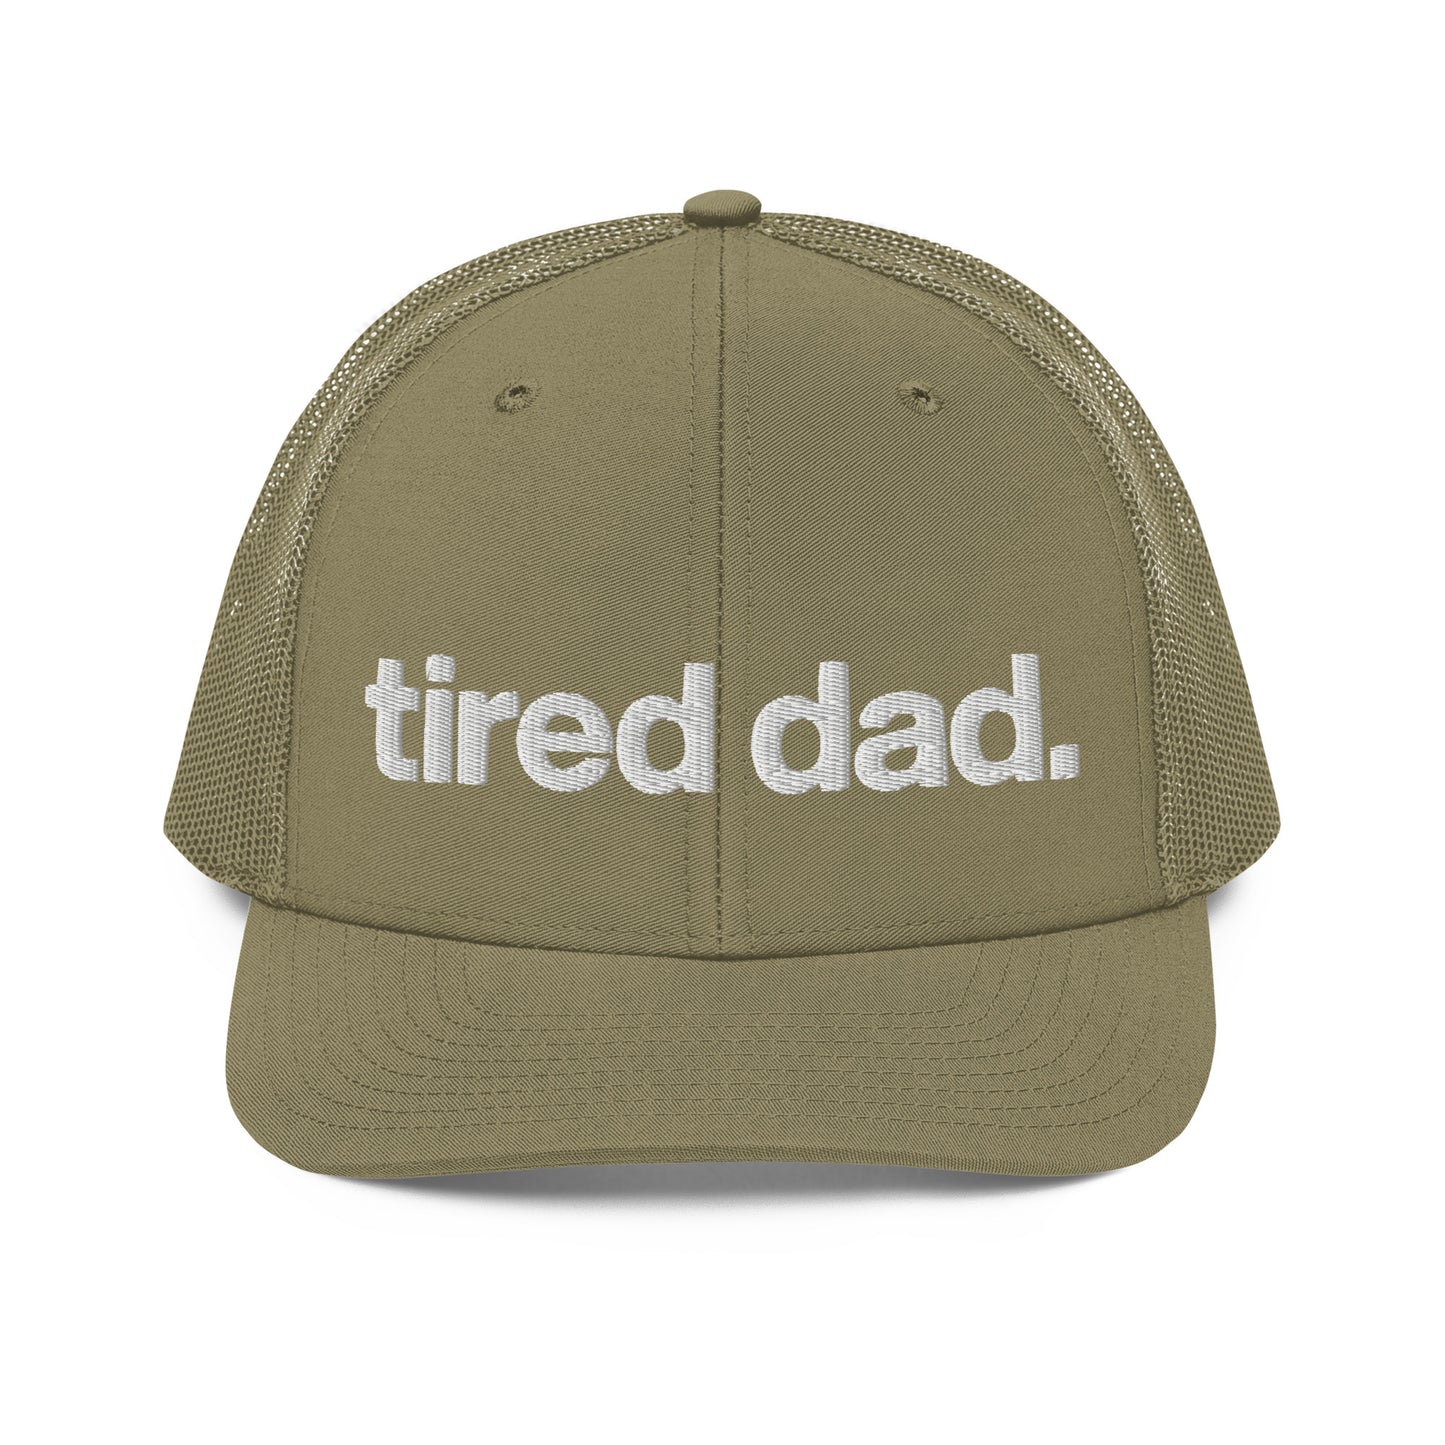 tired dad. trucker hat with 3D embroidery